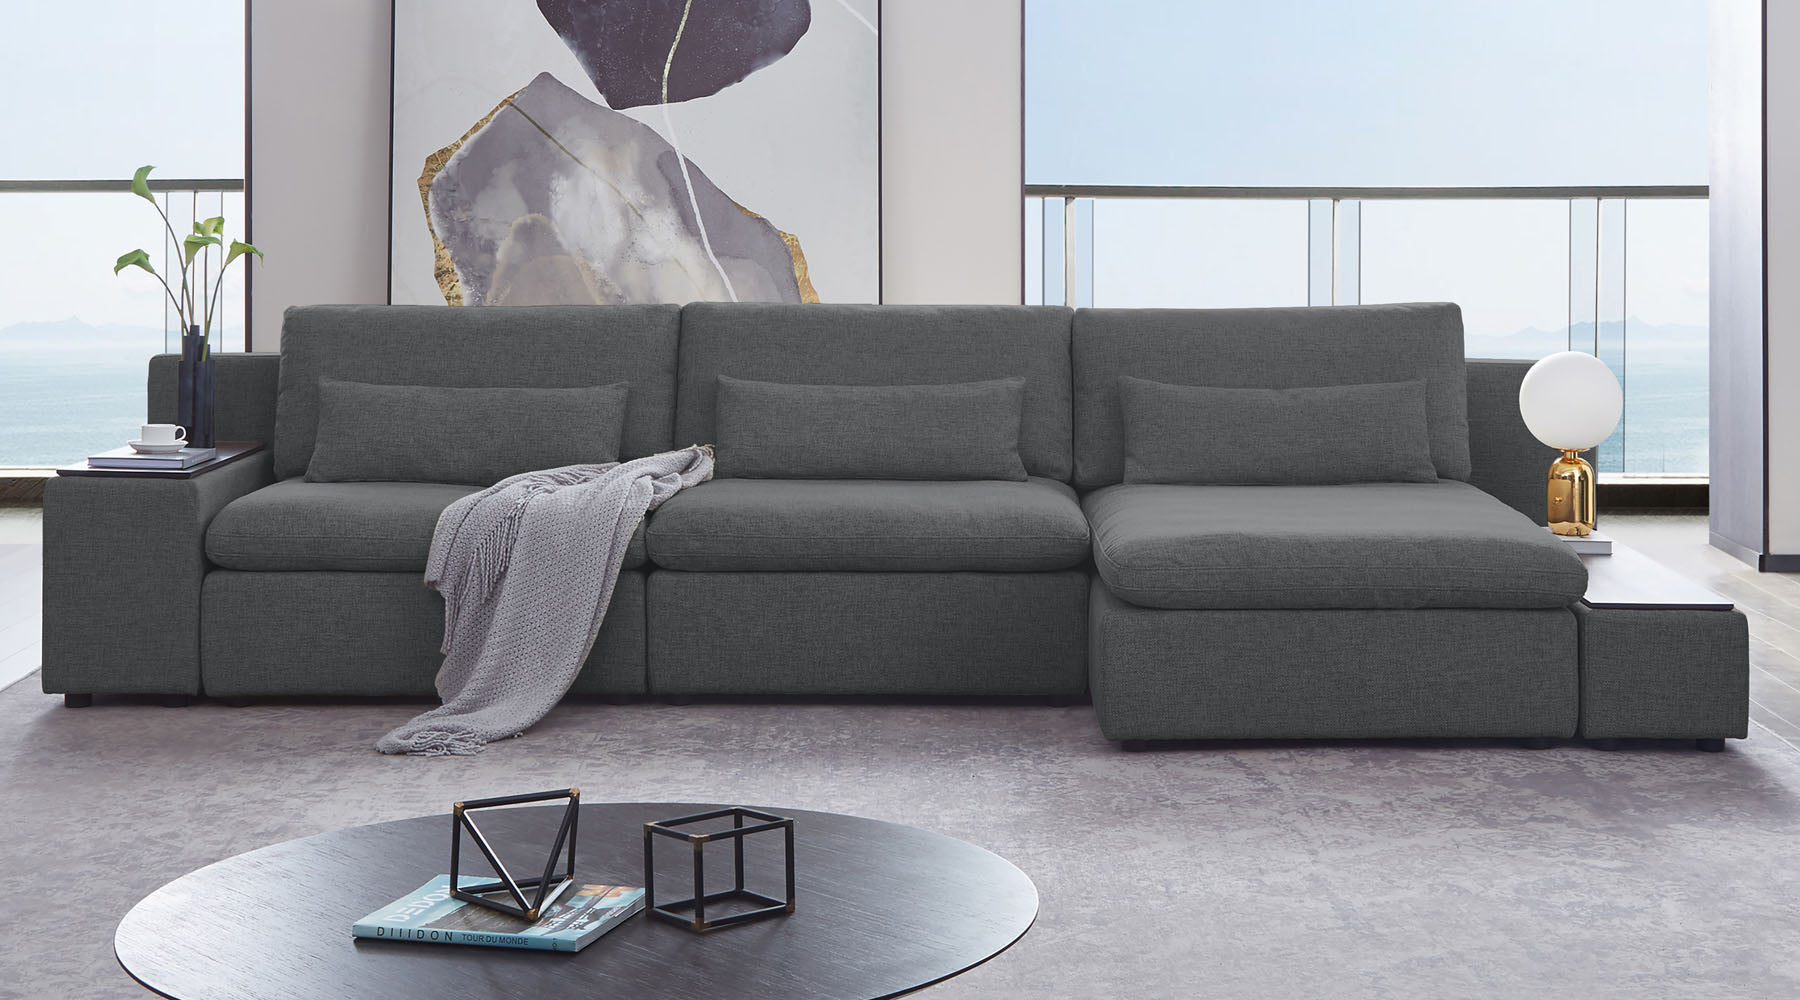 Brighton Sectional Cover - MJM Furniture